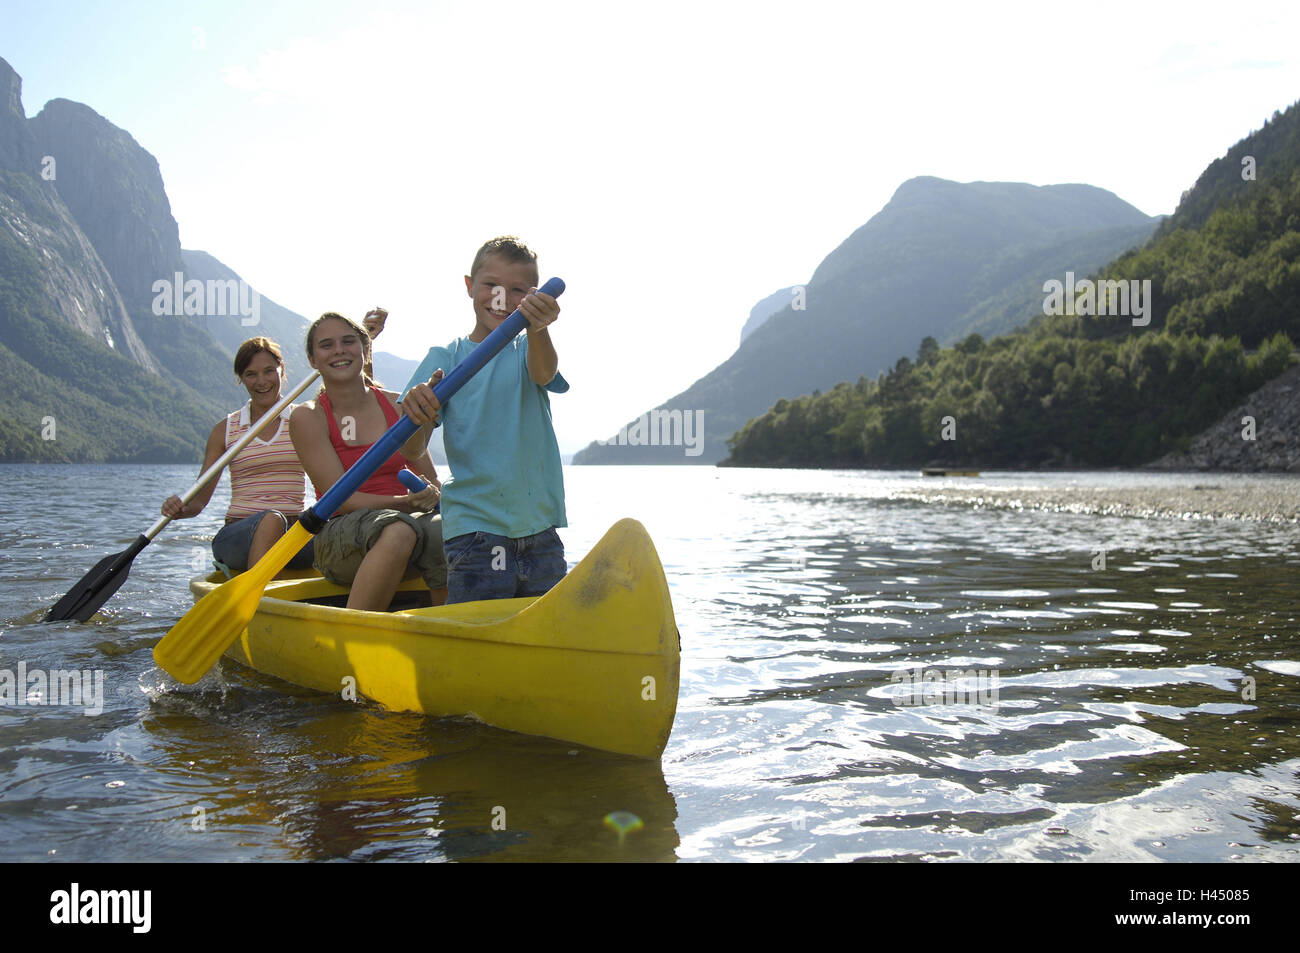 Norway, mountain lake, mother, children, canoe, cheerfully, series,  mountain scenery, mountains, lake, waters, people, woman, girl, boy, boat,  kayak, paddles, joy, happily, together, family, leisure time, vacation,  summer, outside, adventurousness, fun ...